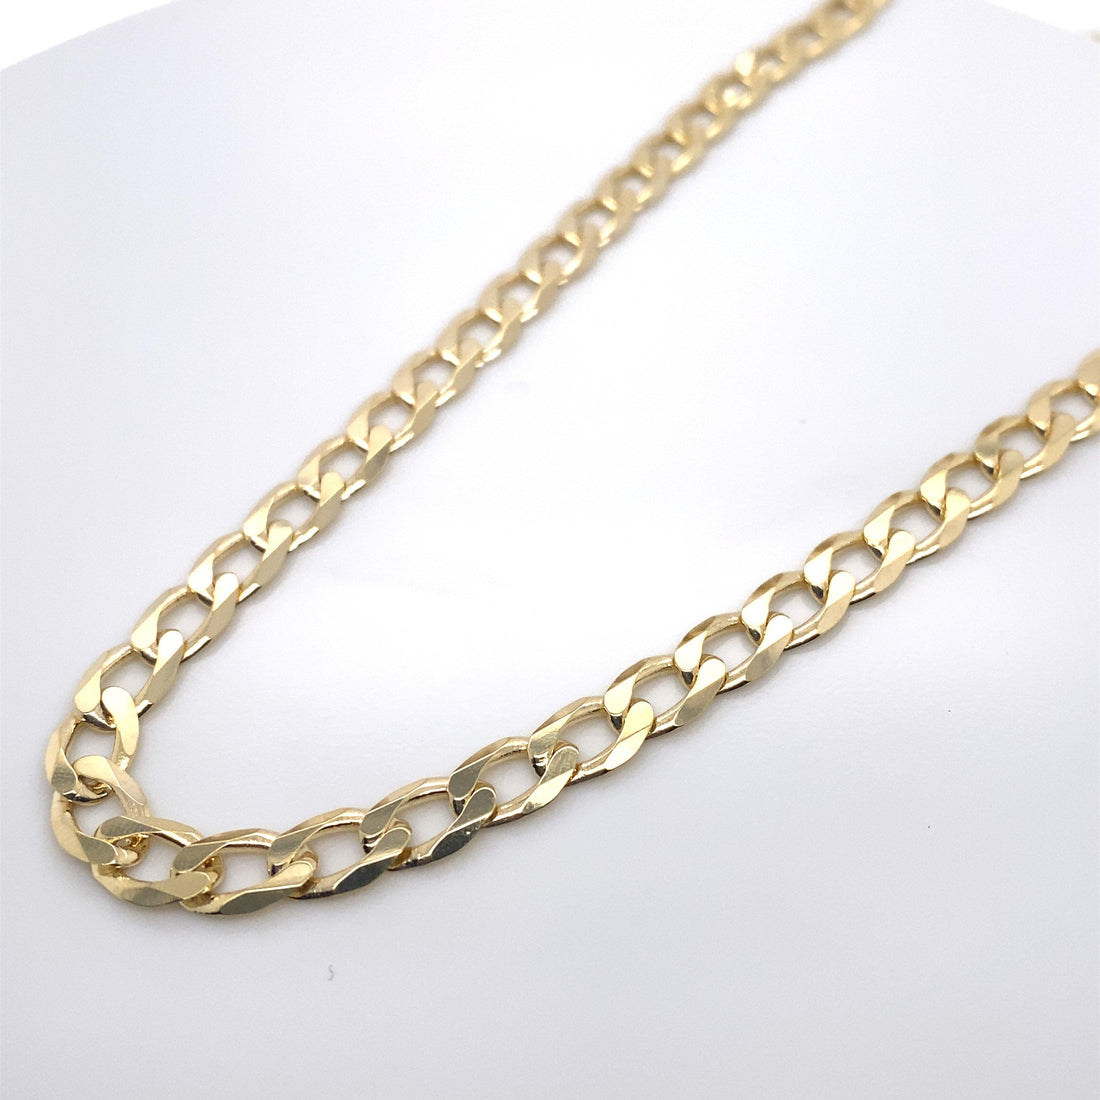 10K YELLOW GOLD BEVELLED CURB HEAVY CHAIN - Appelt&